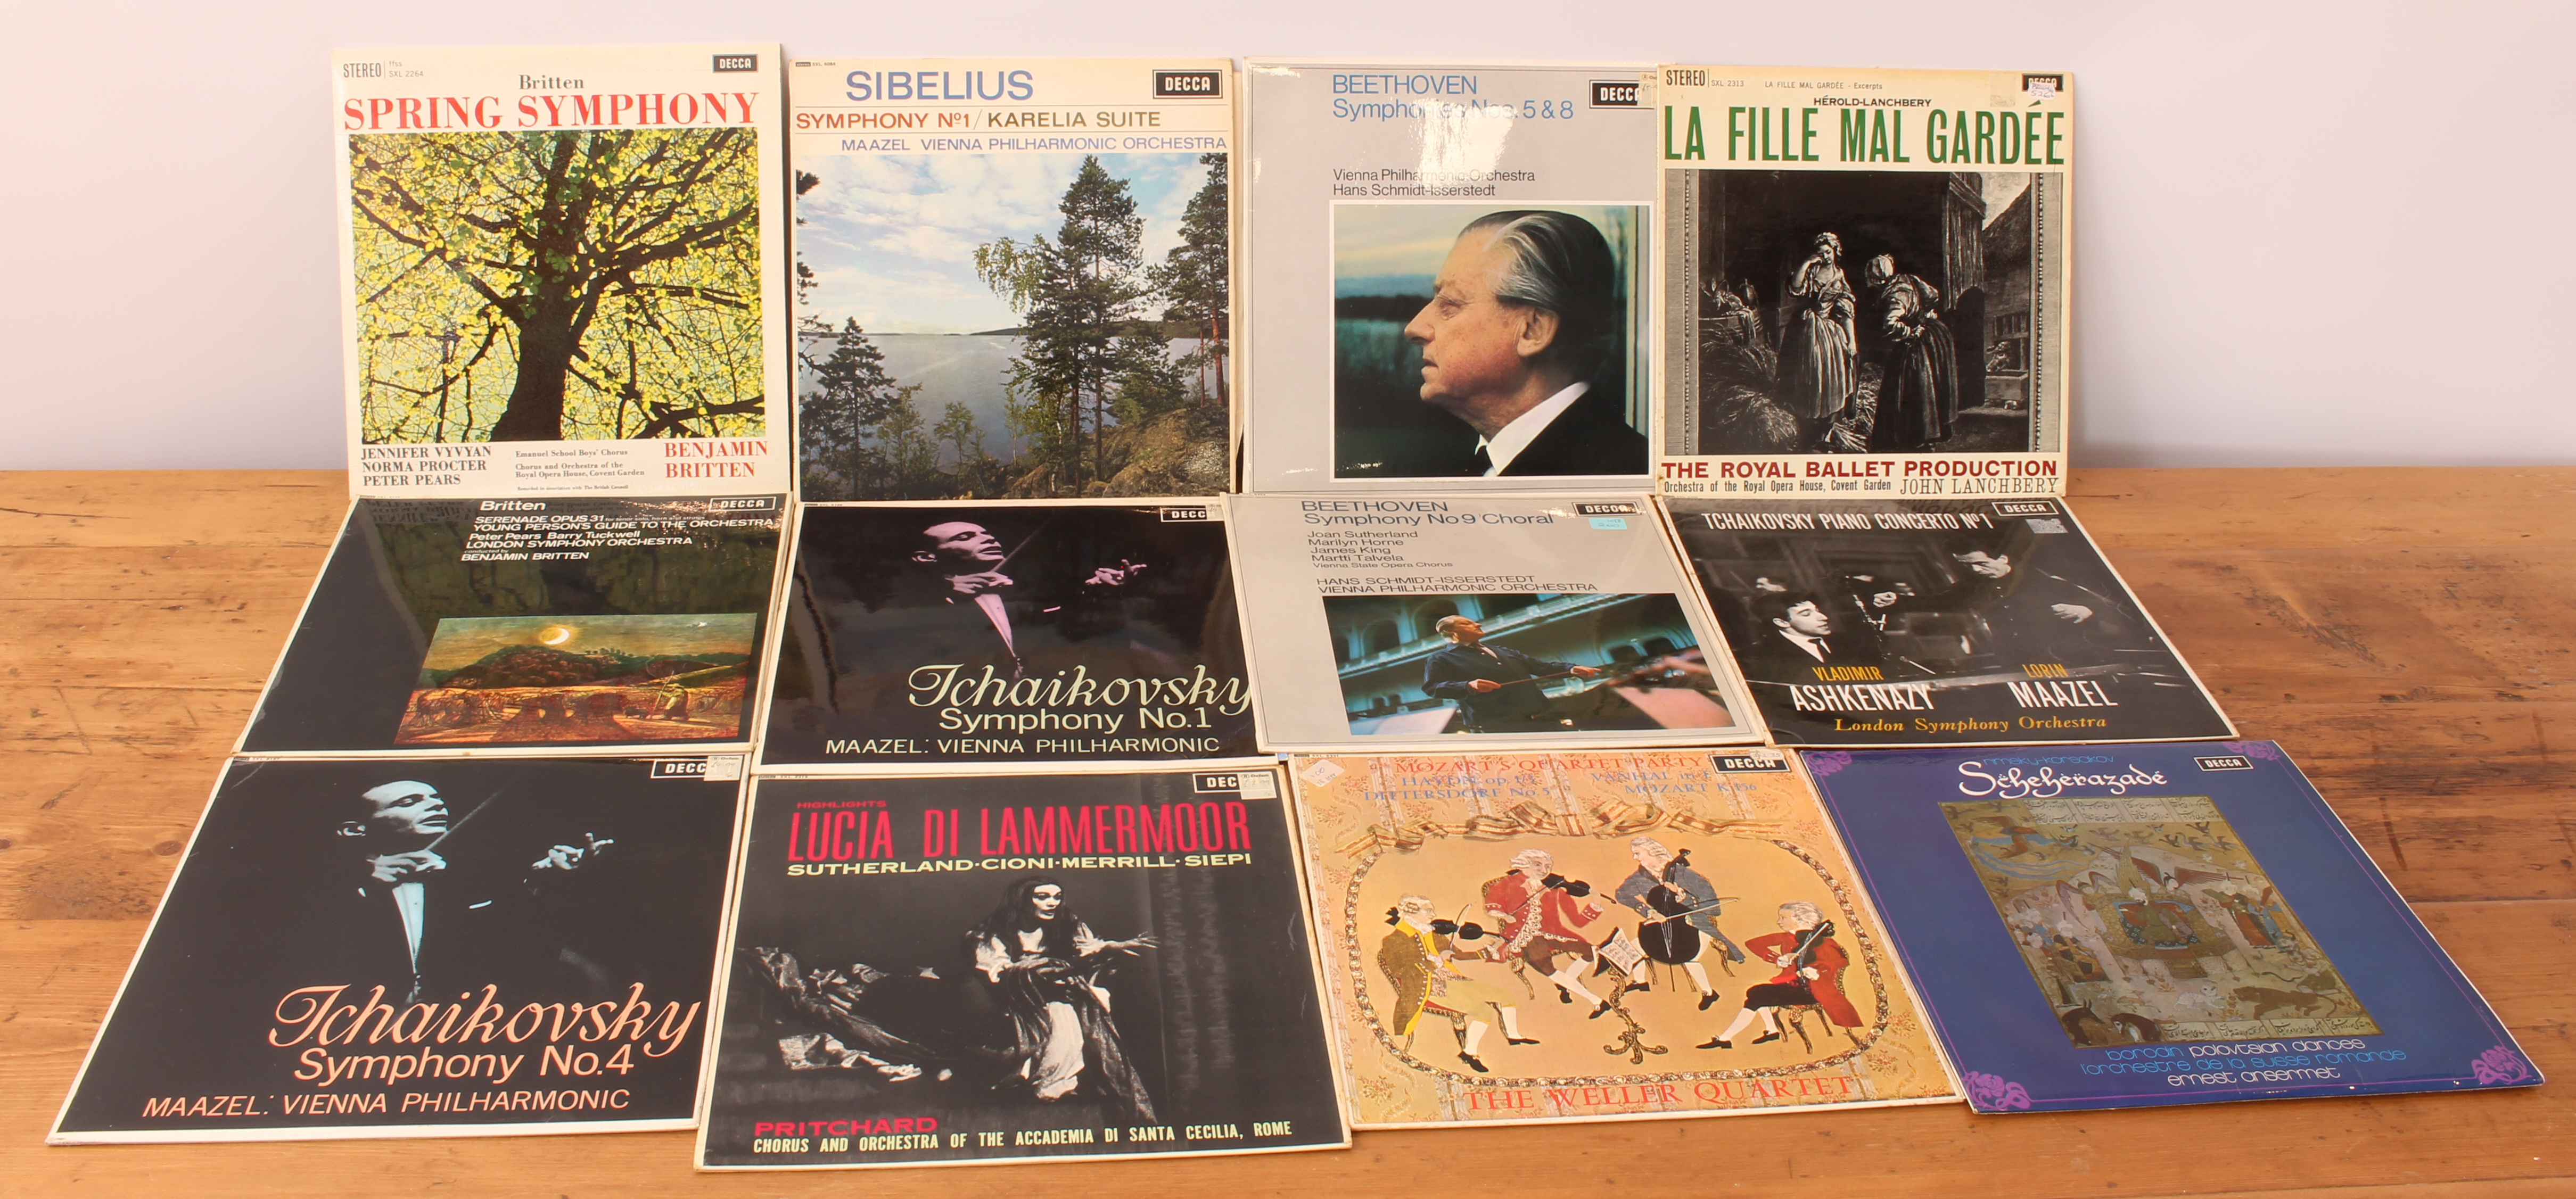 Over 50 ED1/ED2 rarer Classical stereo albums on Decca Records, HMV, Columbia Records and RCA - Image 2 of 5